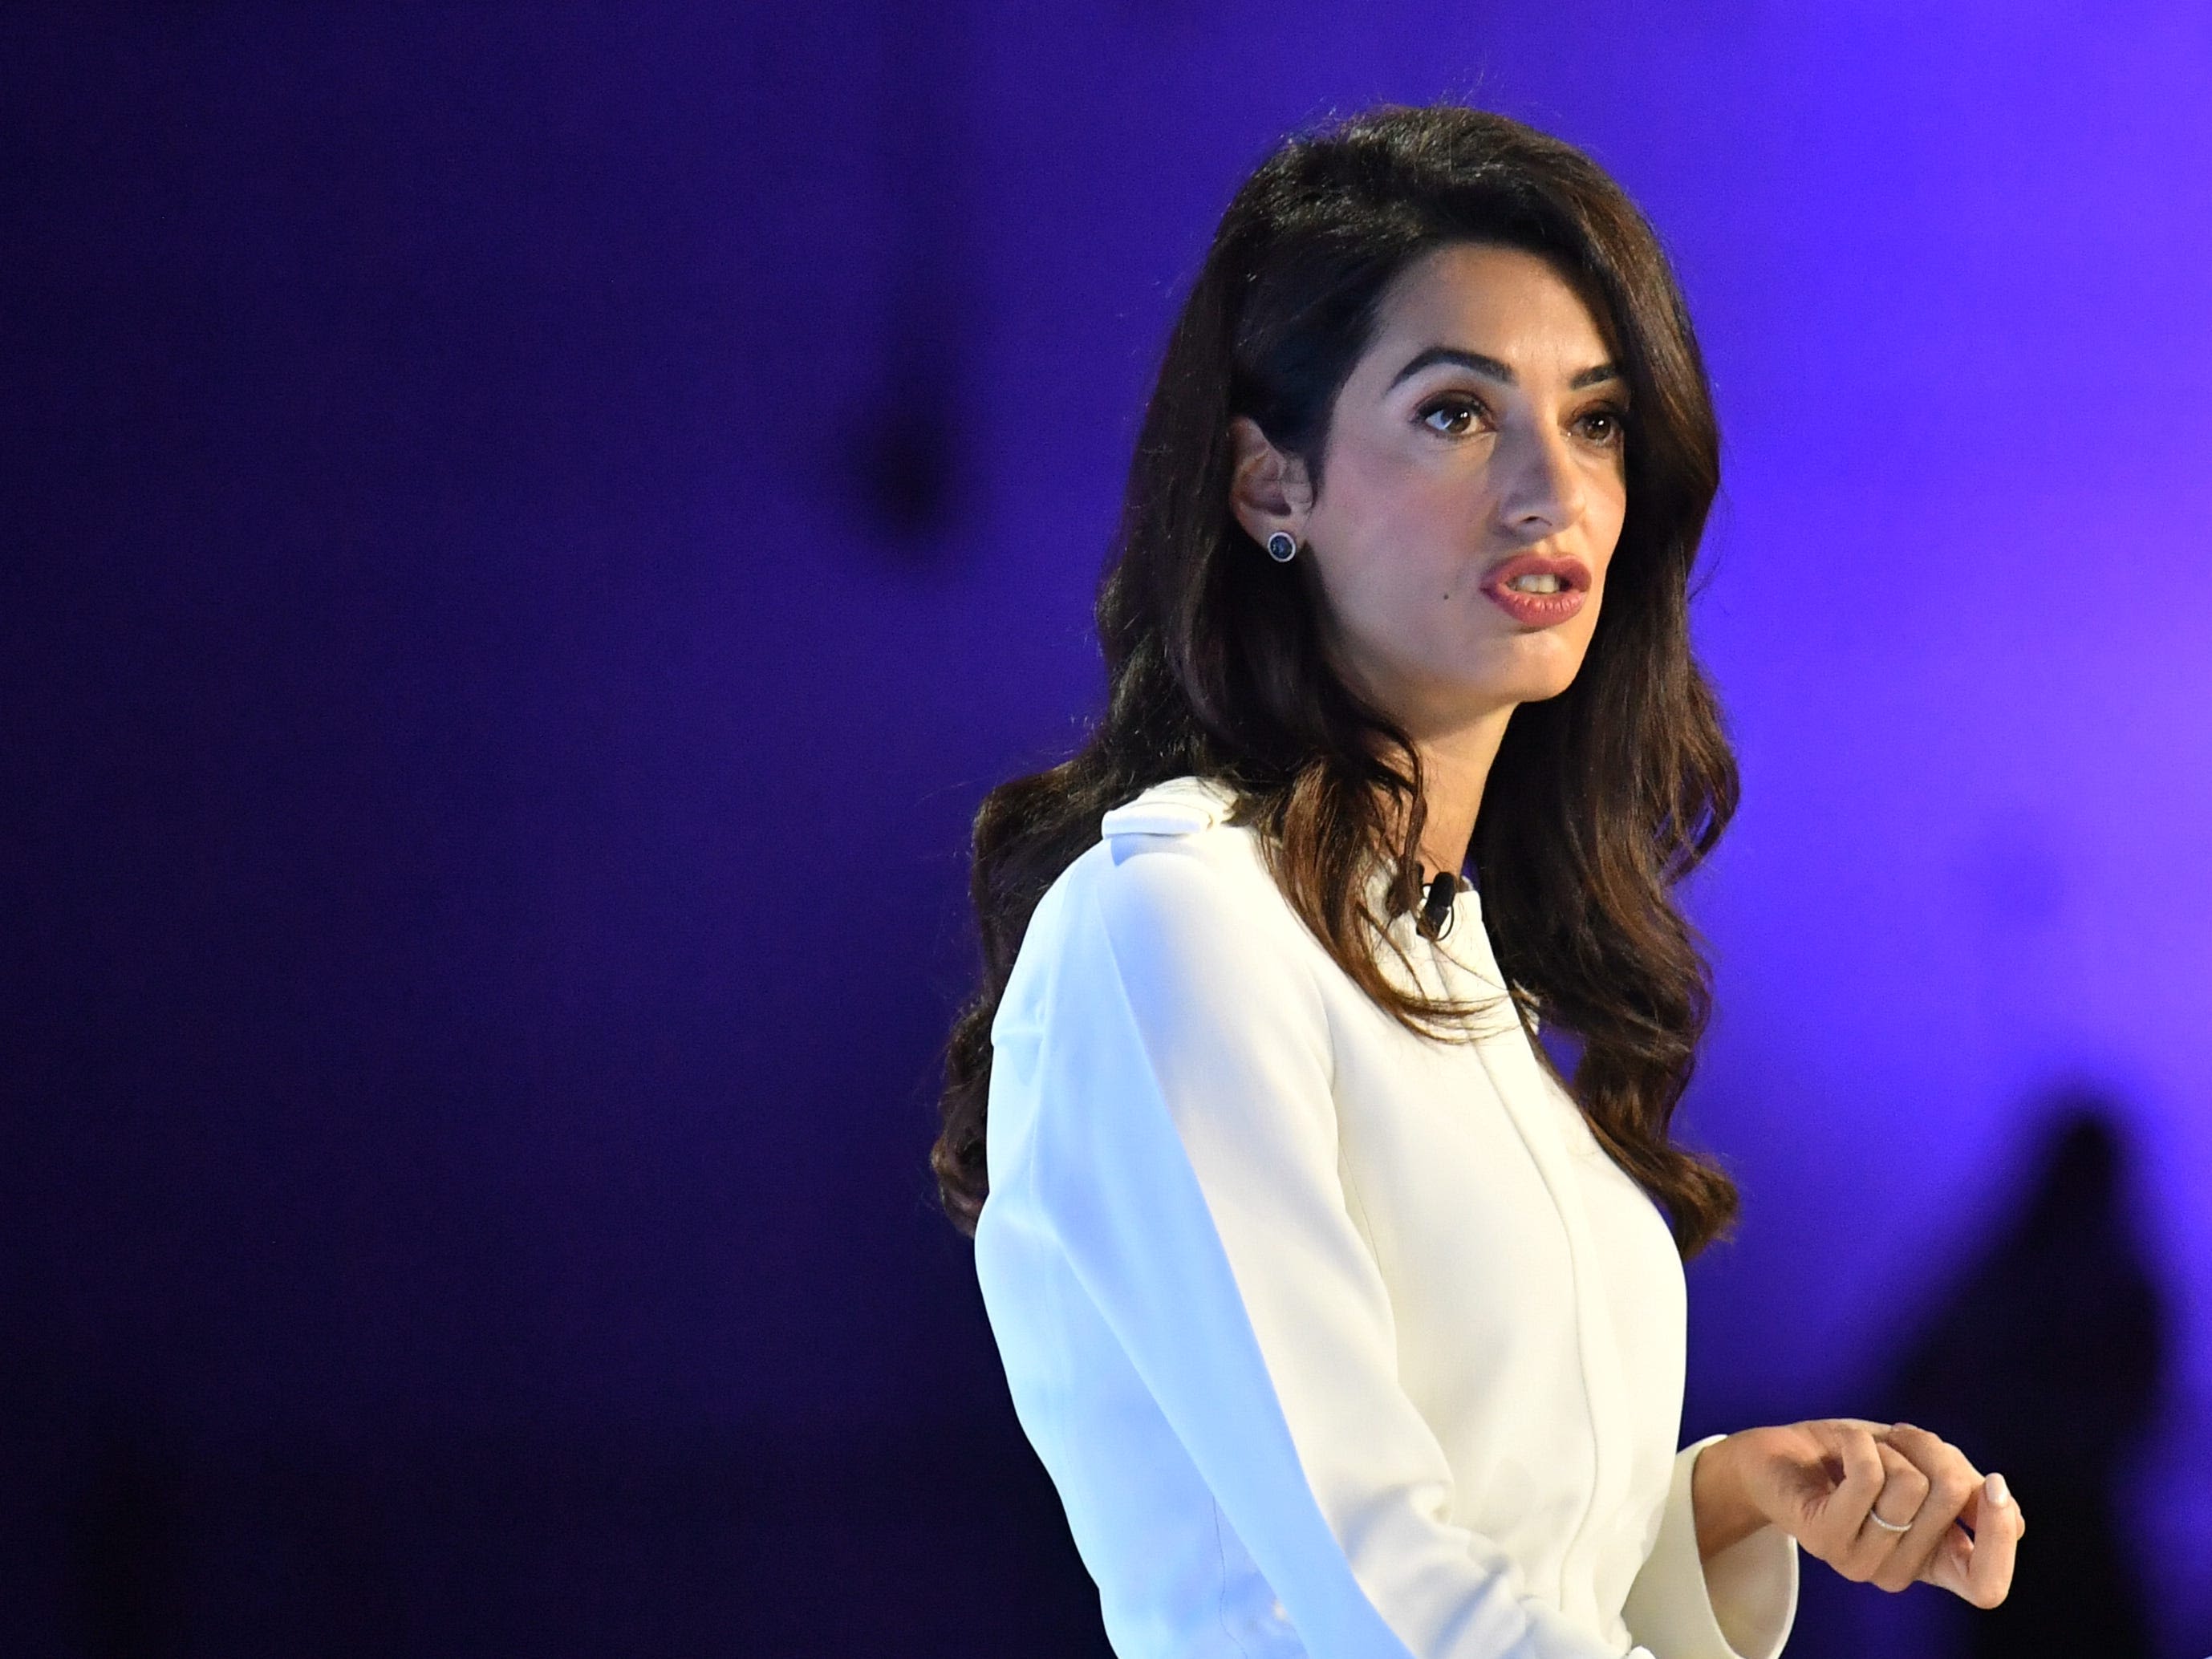 Amal Clooney helped convince The Hague to charge Israel and Hamas leaders with war crimes